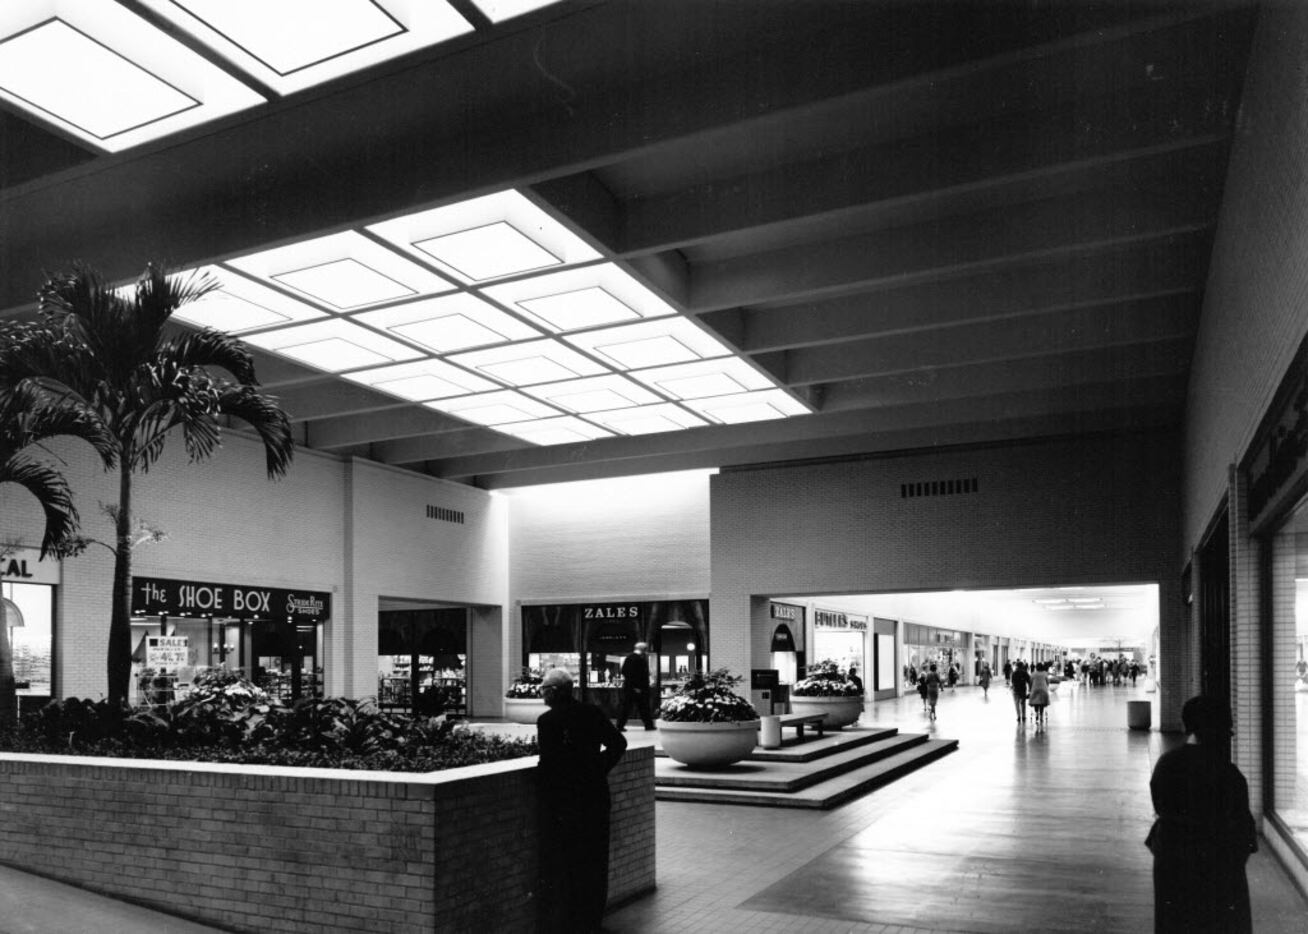 A 1960s photograph of the interior of NorthPark Center 